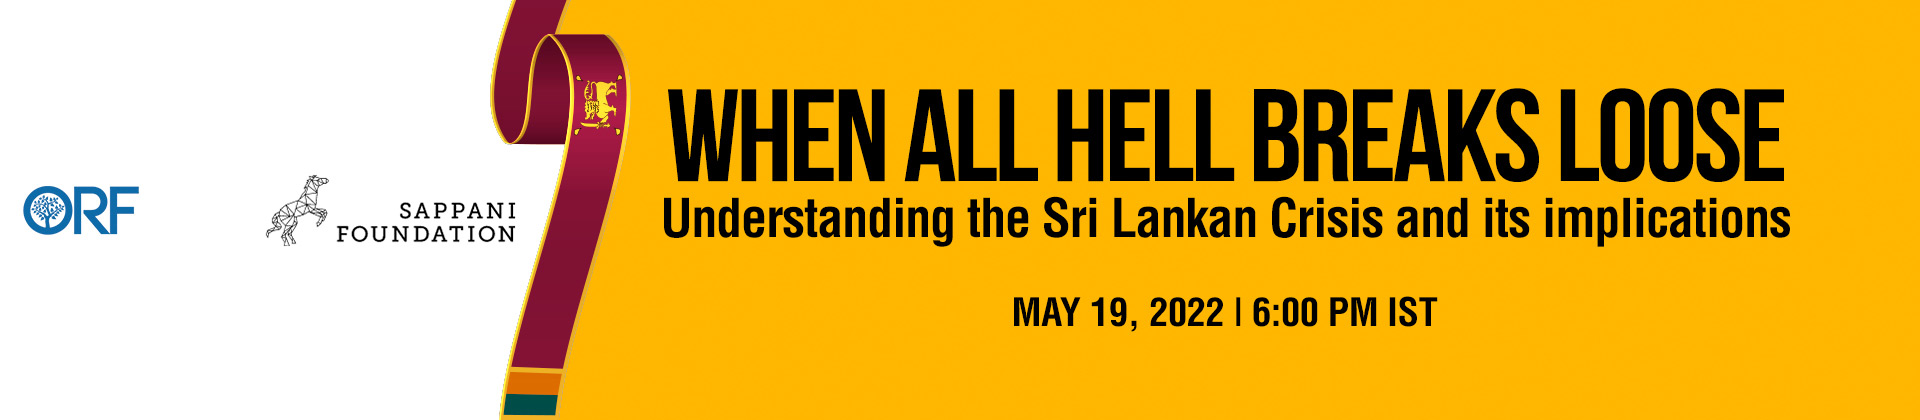 When all hell breaks loose: Understanding the Sri Lankan Crisis and its implications